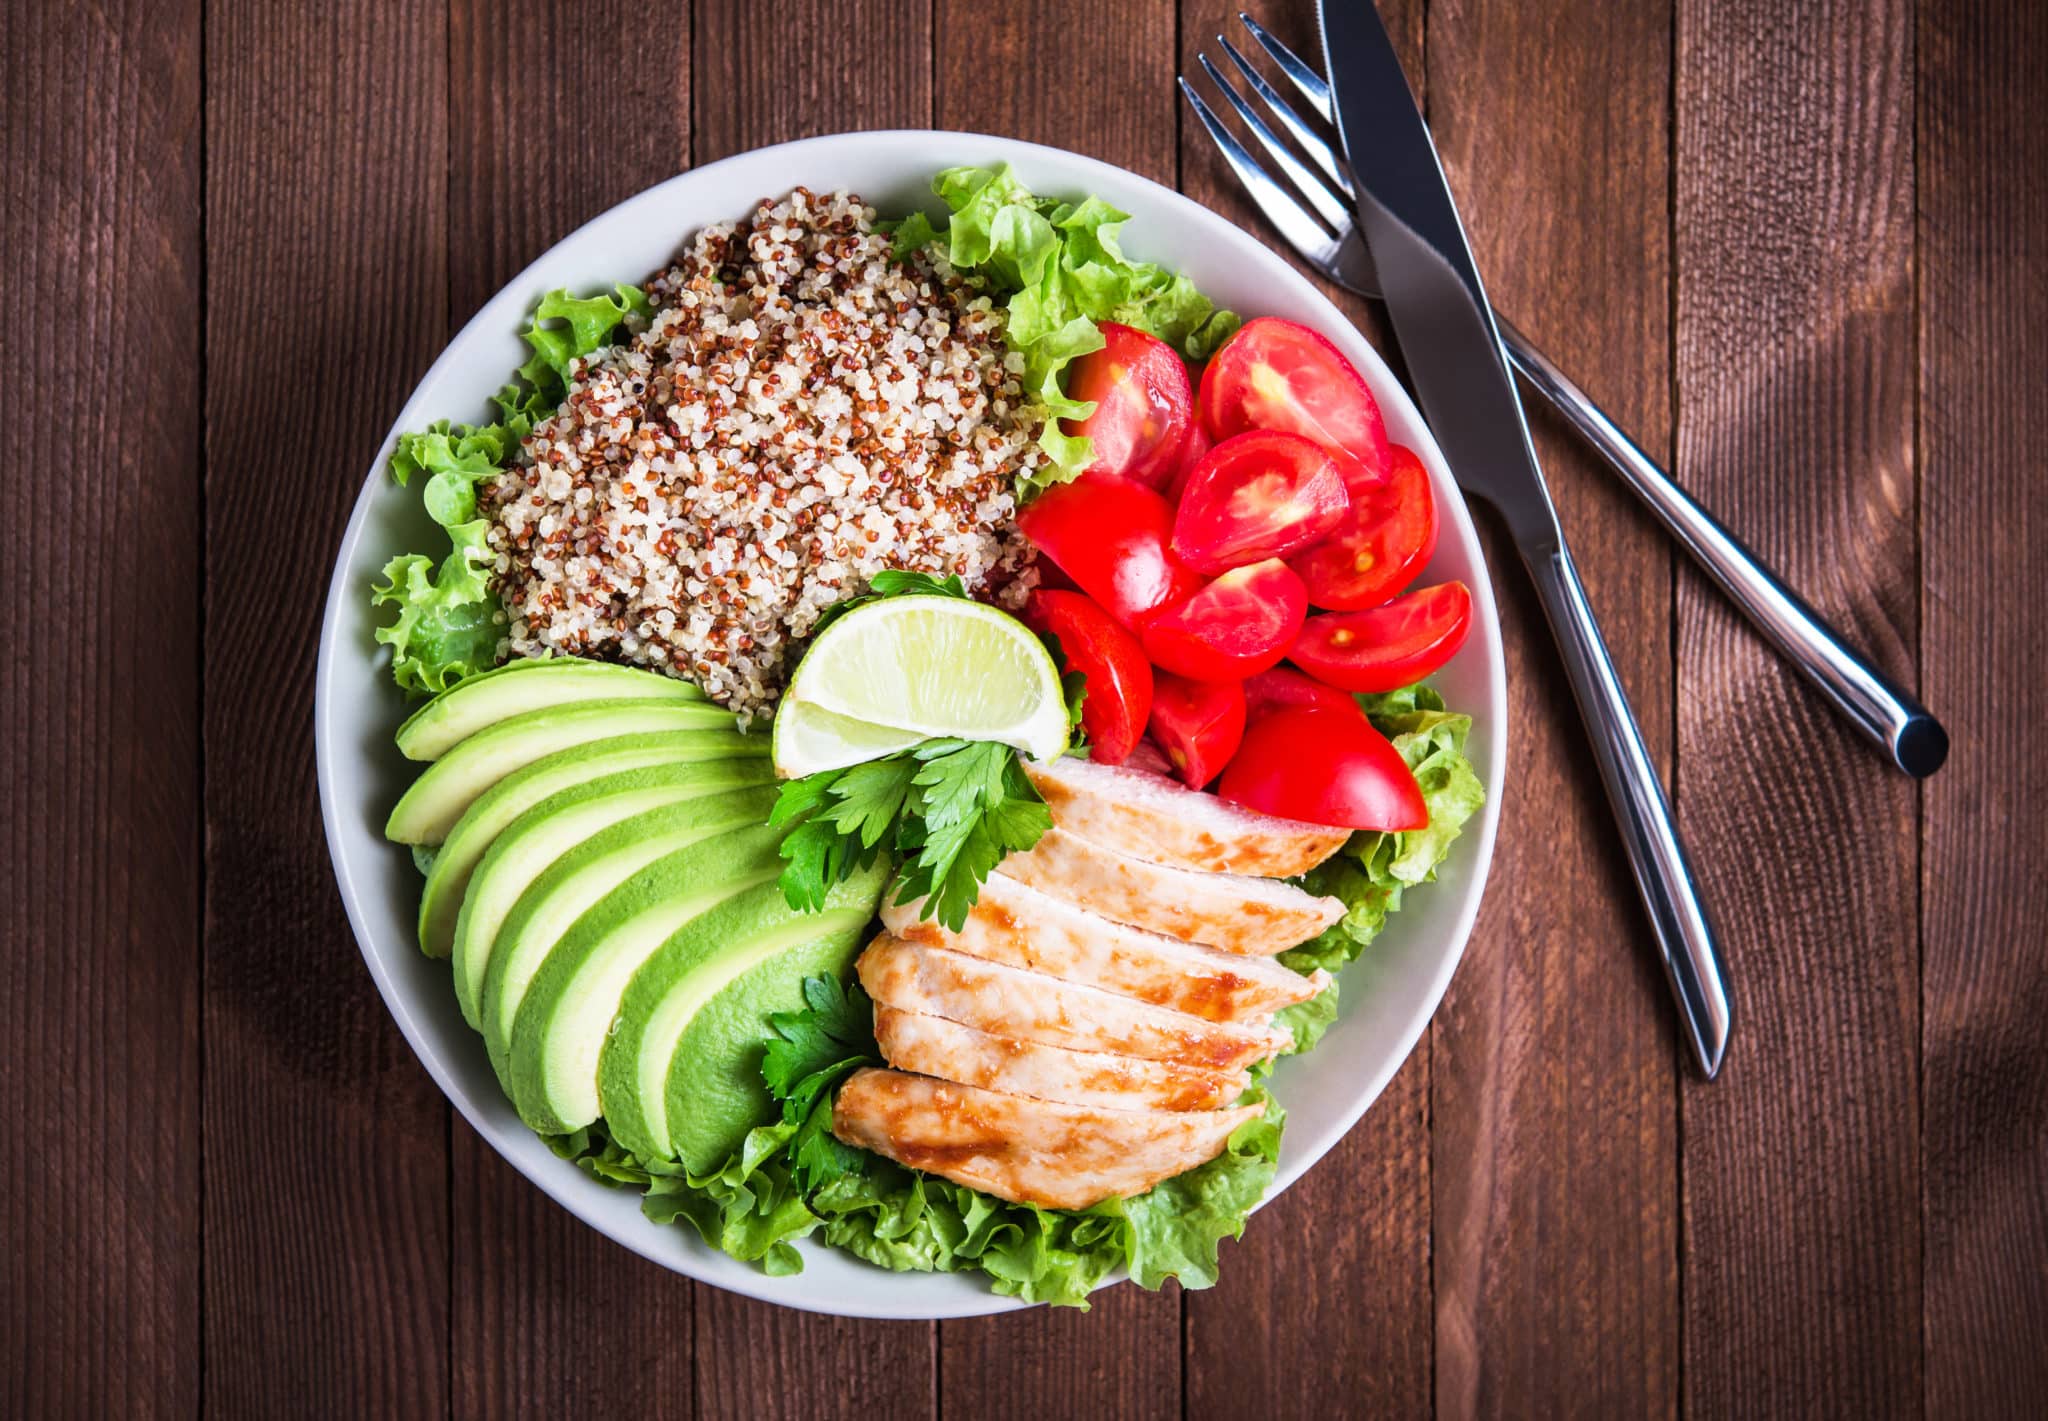 Try this healthy lunch option to lose belly fat.